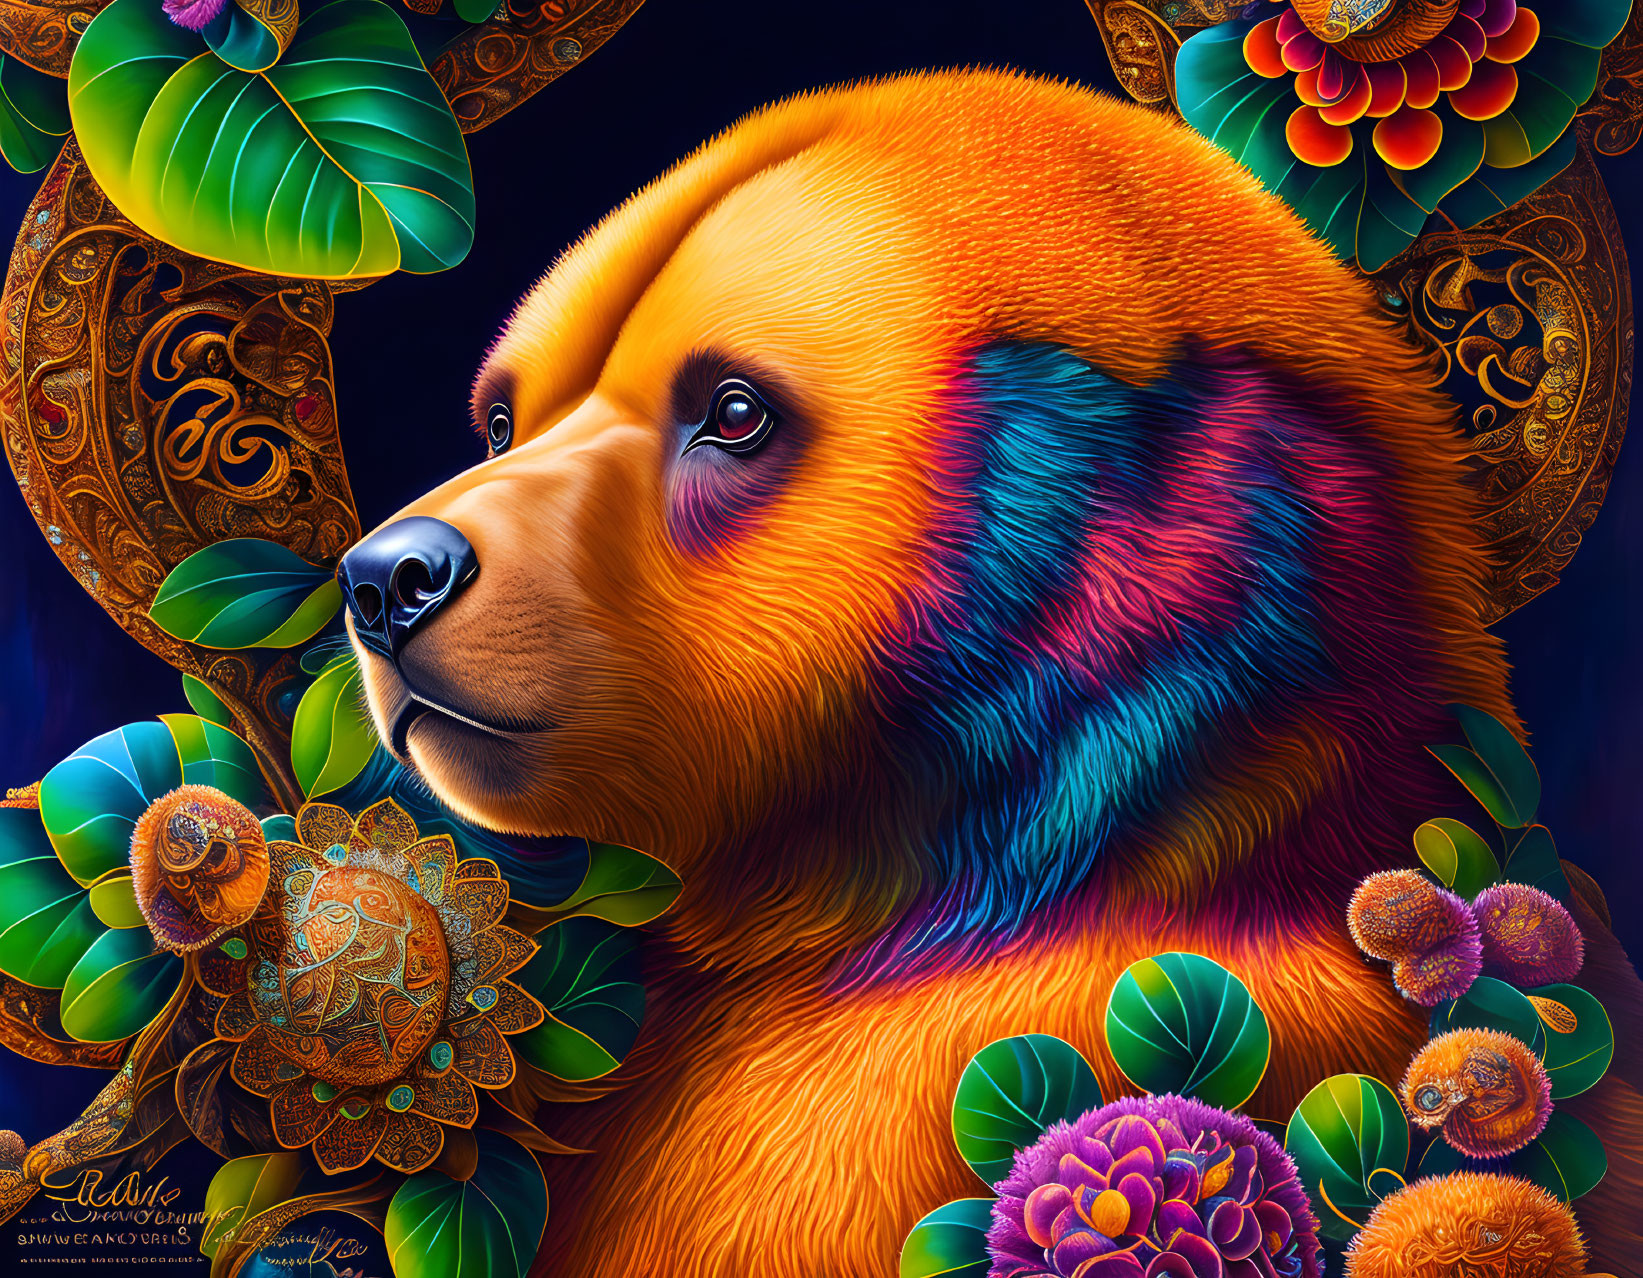 Colorful Rainbow Bear Surrounded by Ornate Foliage and Flowers